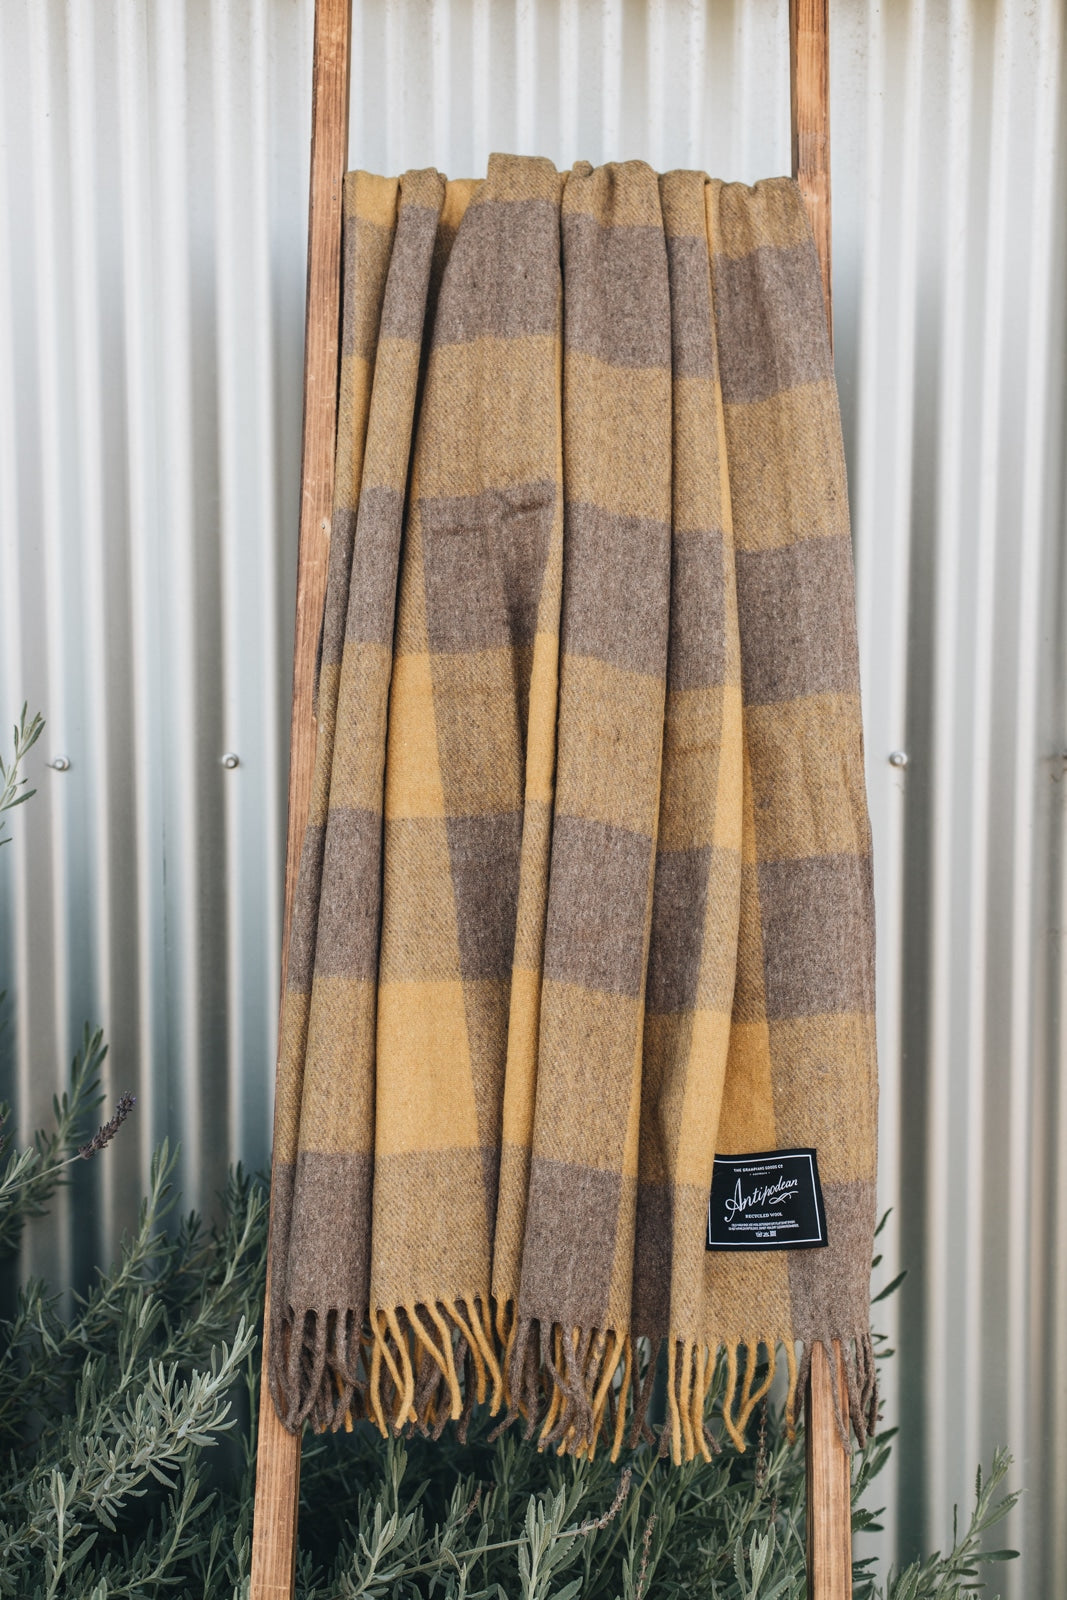 Wattleseed | Recycled Wool Picnic Check Blanket